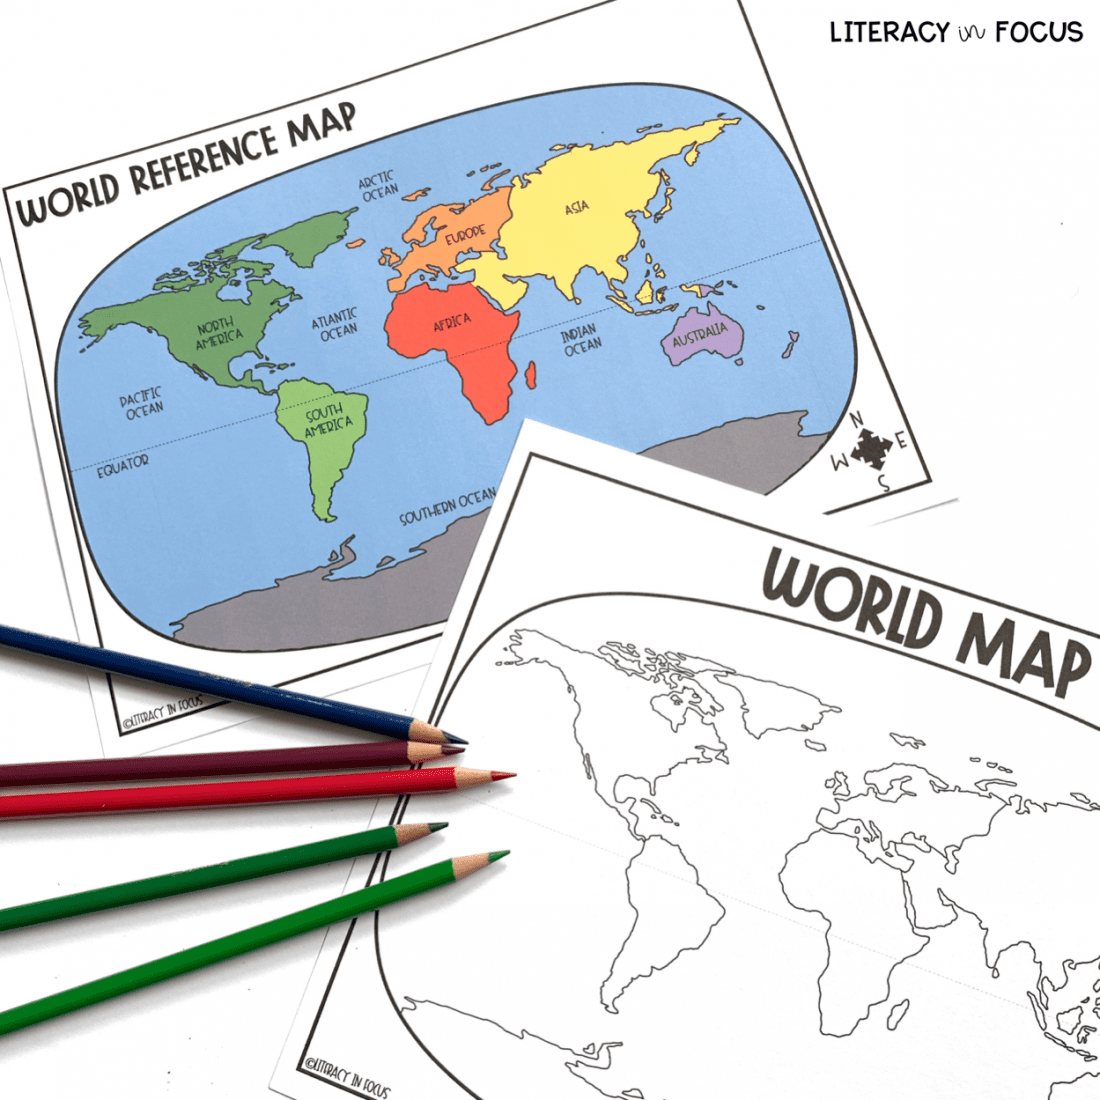 world geography map assignments